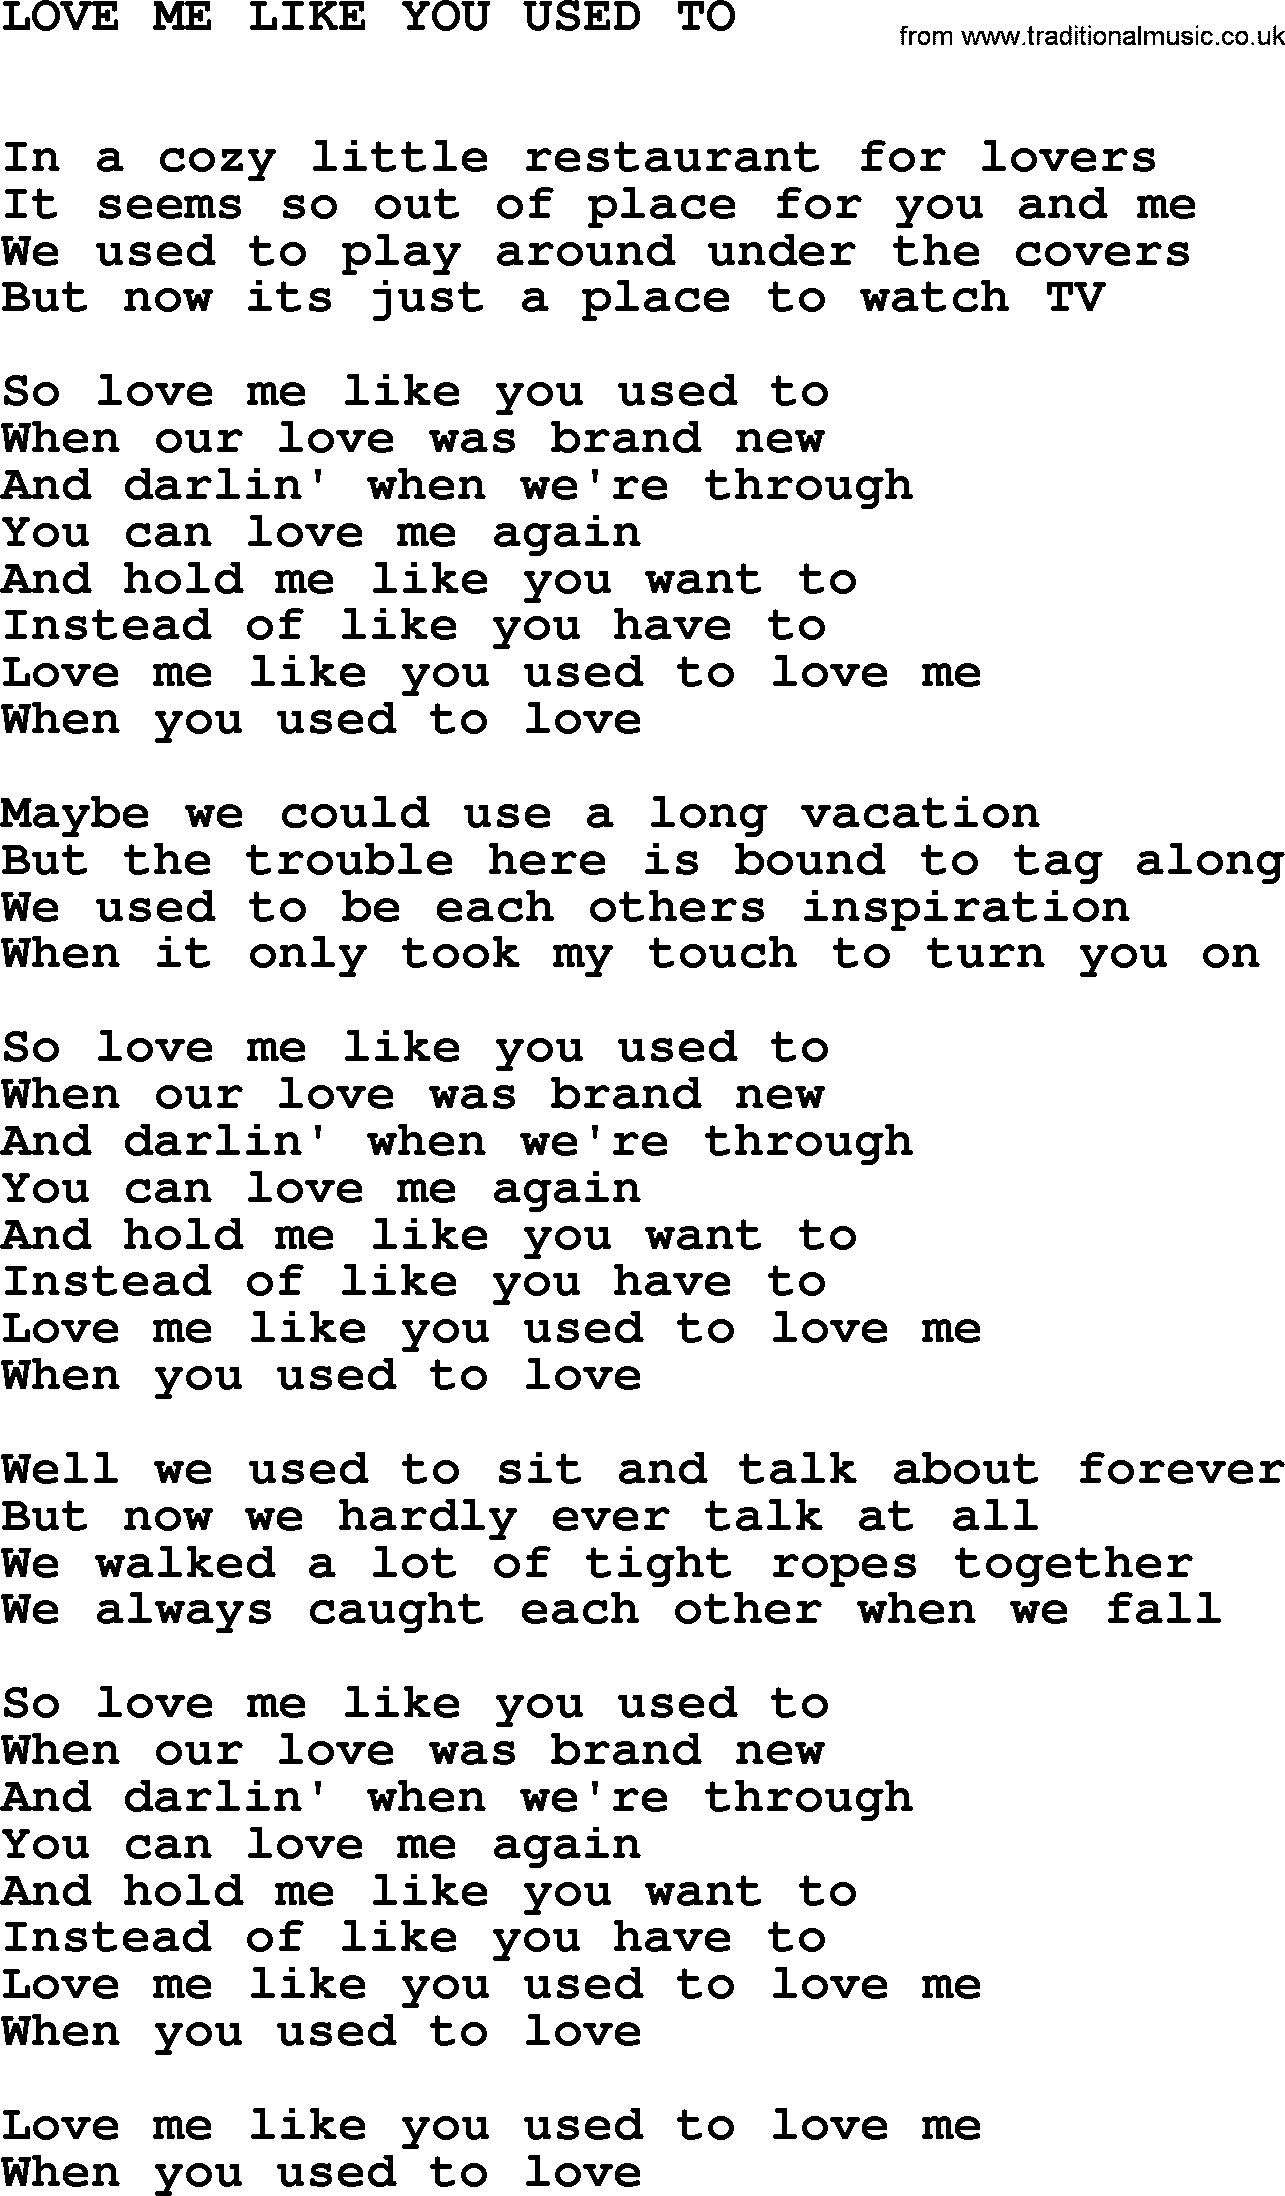 Johnny Cash Song Love Me Like You Used To Lyrics